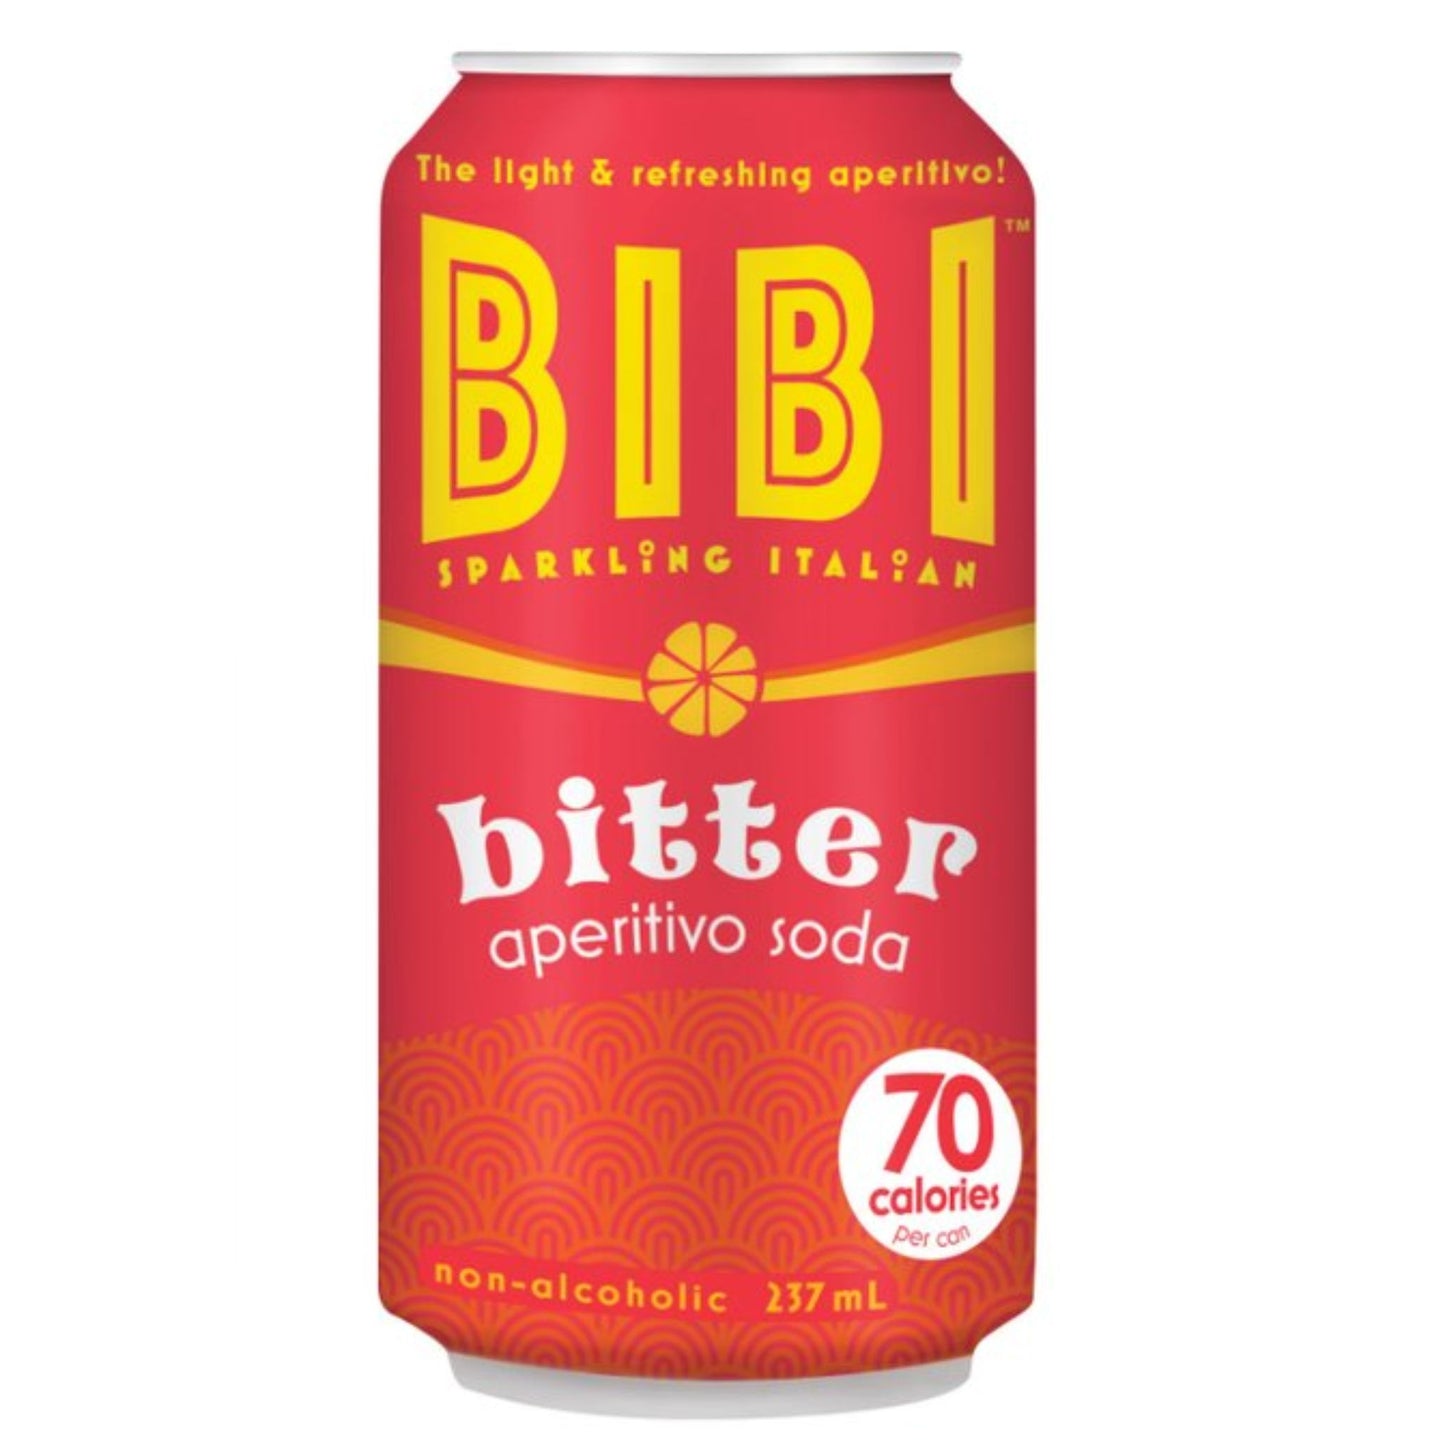 BIBI Bitter Aperitivo Soda is available for sale at Knyota Drinks in Ottawa.